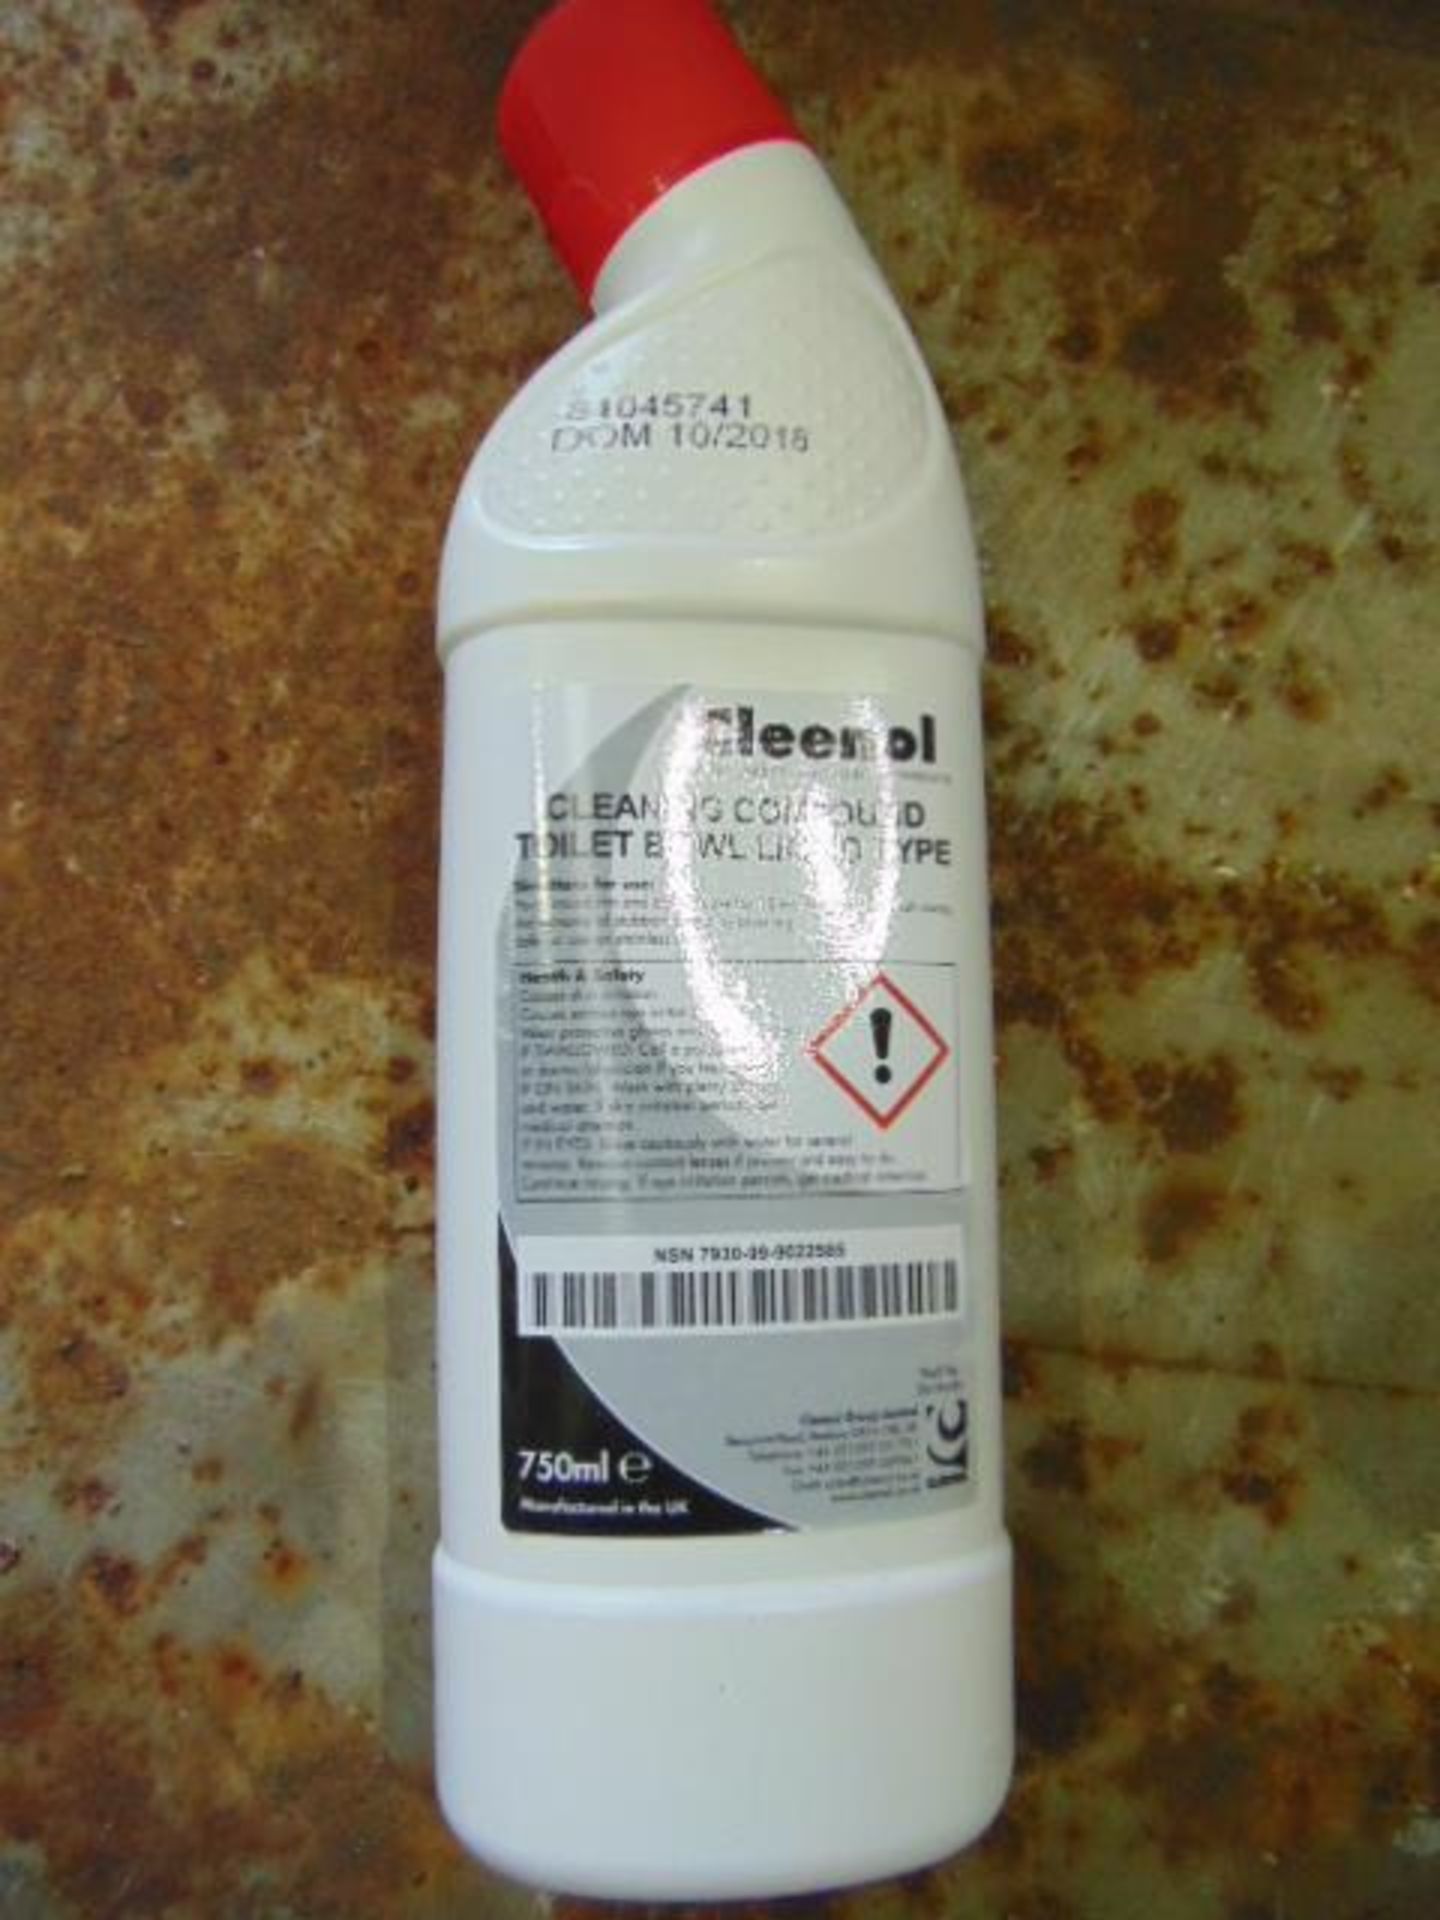 Qty 48 x 750ml Cleenol Toilet Cleaning Compound Liquid direct from reserve stores - Image 2 of 3